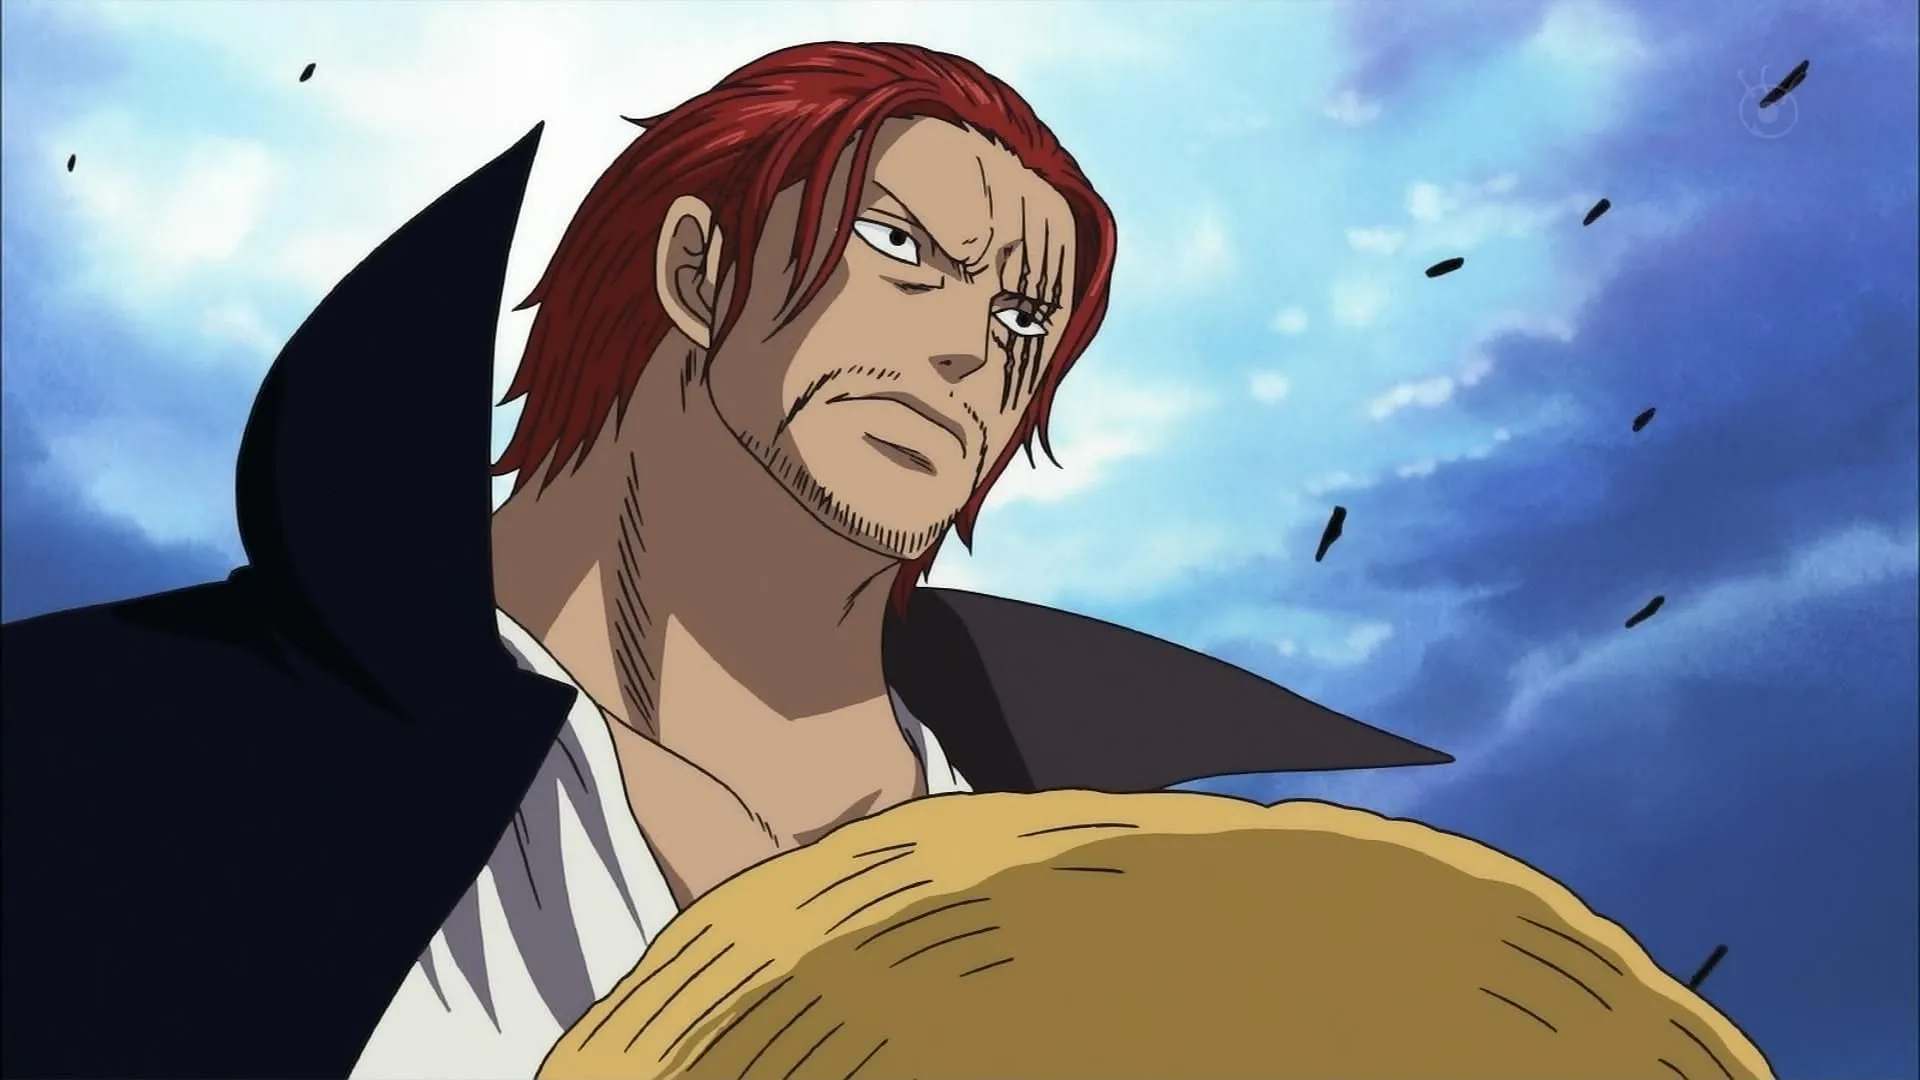 "Red Hair" Shanks (Toei Animation, One Piece를 통한 이미지)